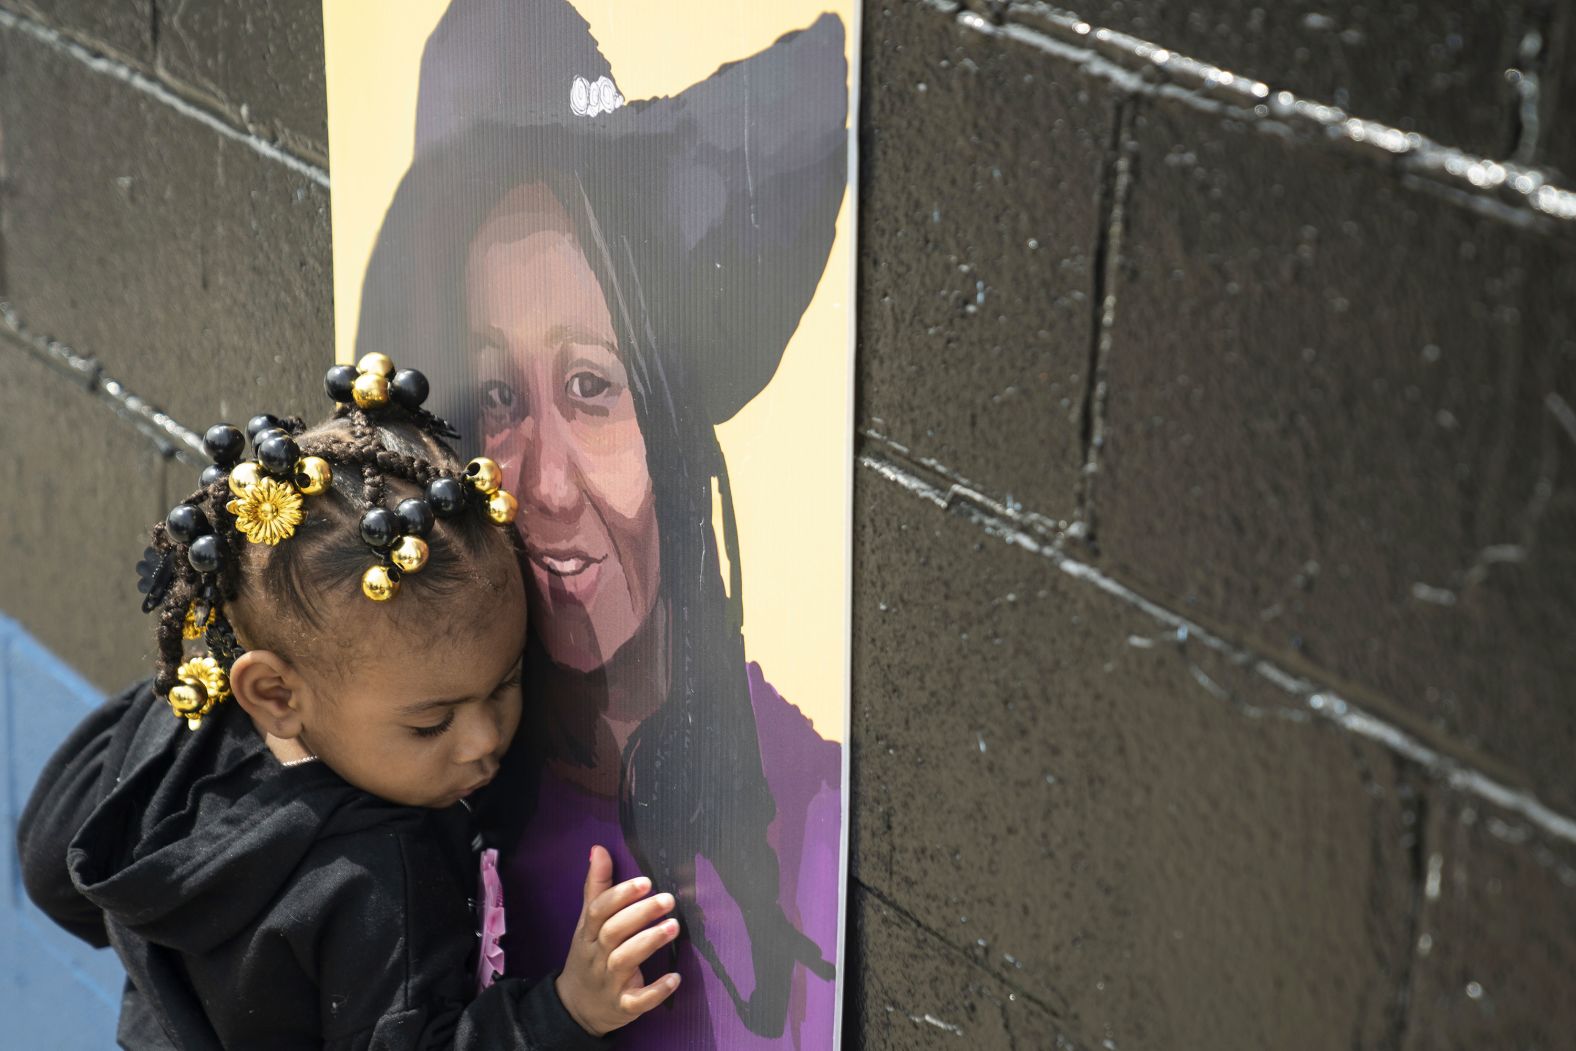 Naujaj Buchanan, 2, nestles close to a portrait of her godmother, Geraldine Talley, on Sunday, May 14, across the street from the Buffalo, New York, supermarket where Talley was killed in a <a href="index.php?page=&url=https%3A%2F%2Fwww.cnn.com%2F2023%2F05%2F17%2Feurope%2Fitaly-flooding-three-killed-rain-intl%2Findex.html" target="_blank">mass shooting last year</a>.